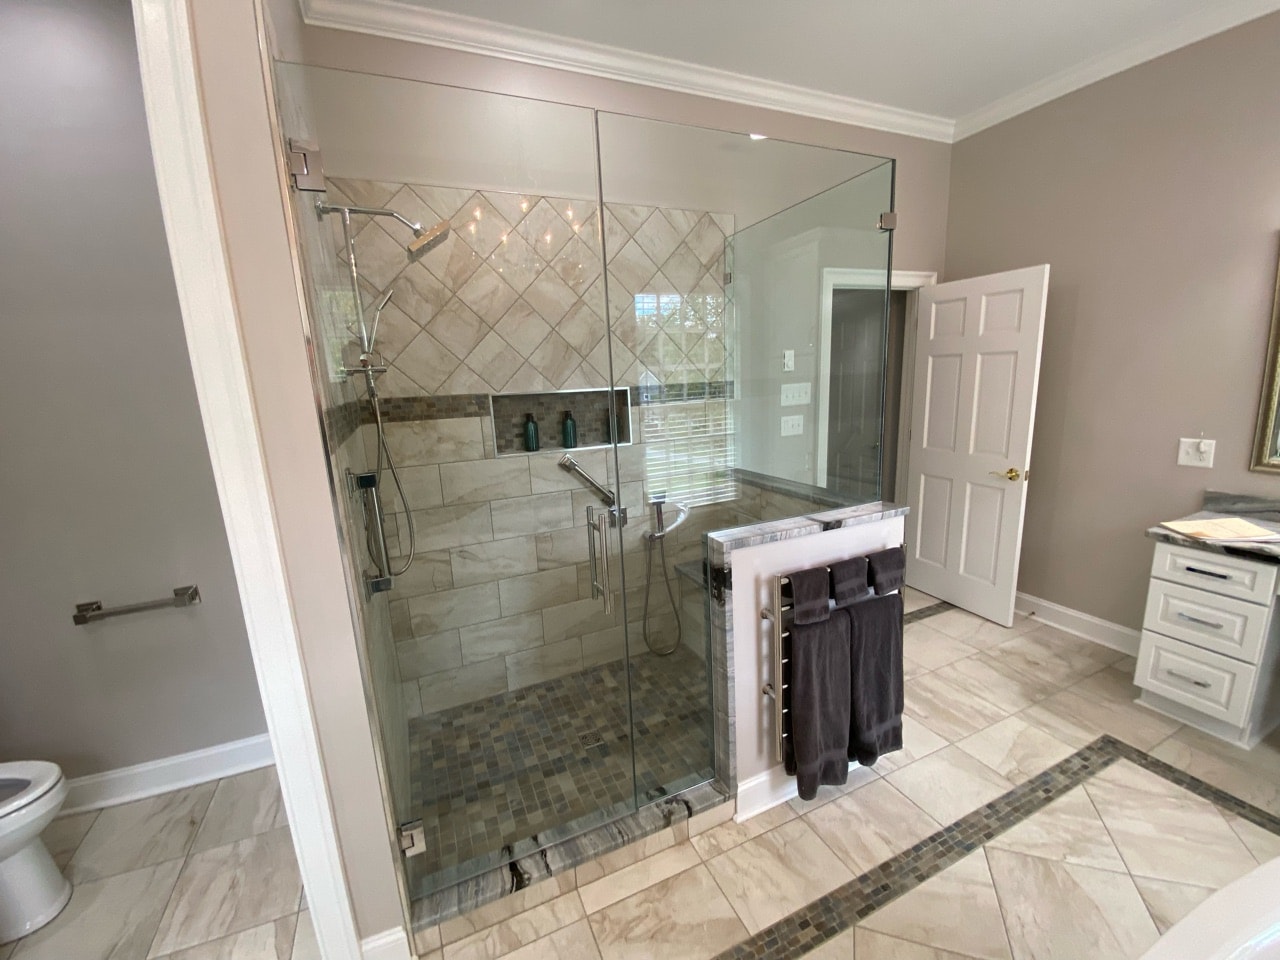 A brand-new bathroom with contemporary fixtures, a sleek glass shower enclosure, and a modern vanity with a marble countertop.